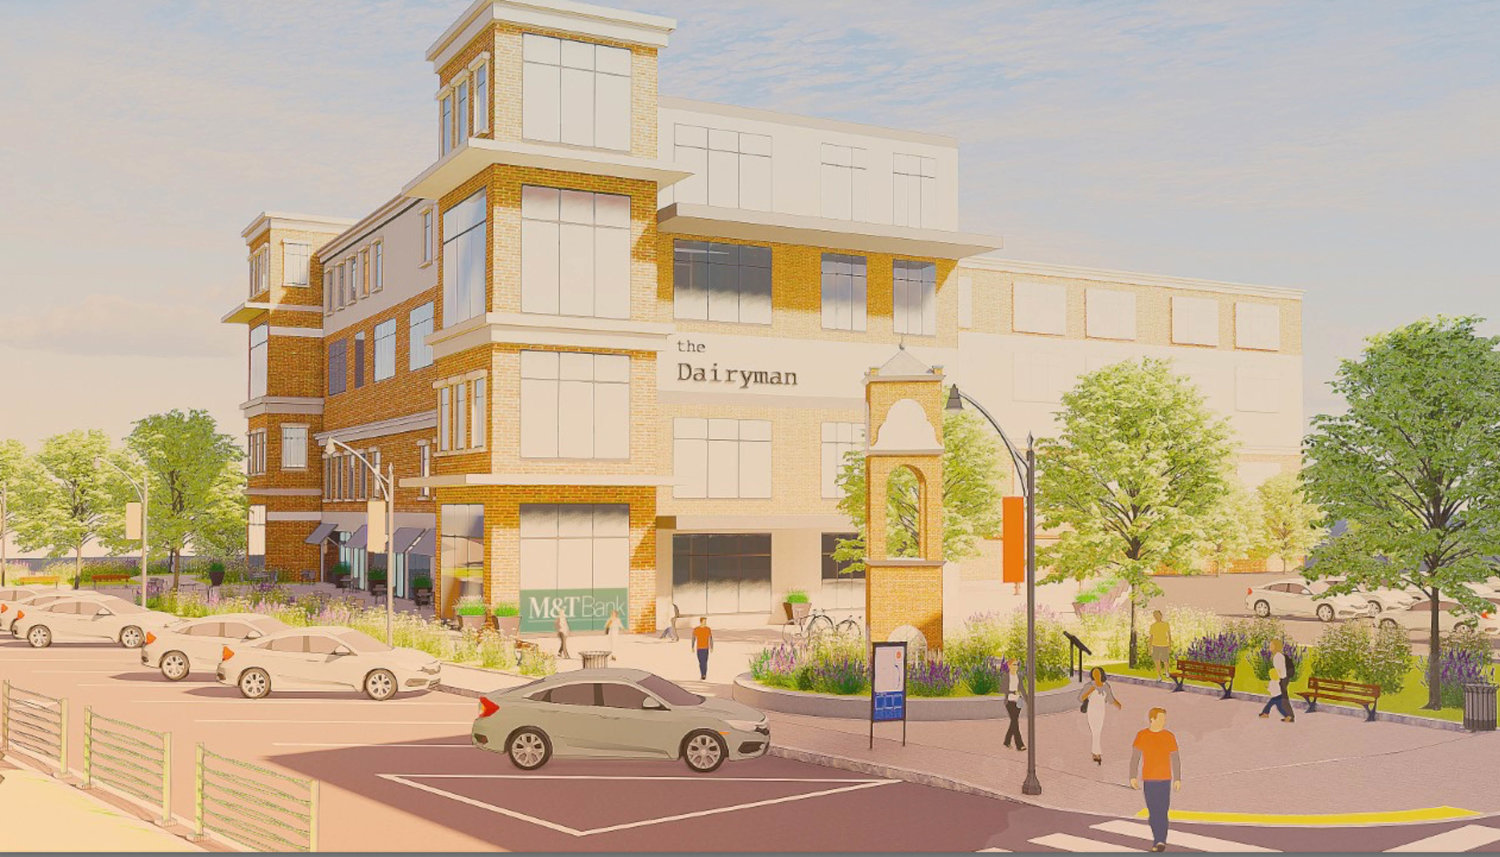 Renderings of the new downtown revitalization project happening in Little Falls.